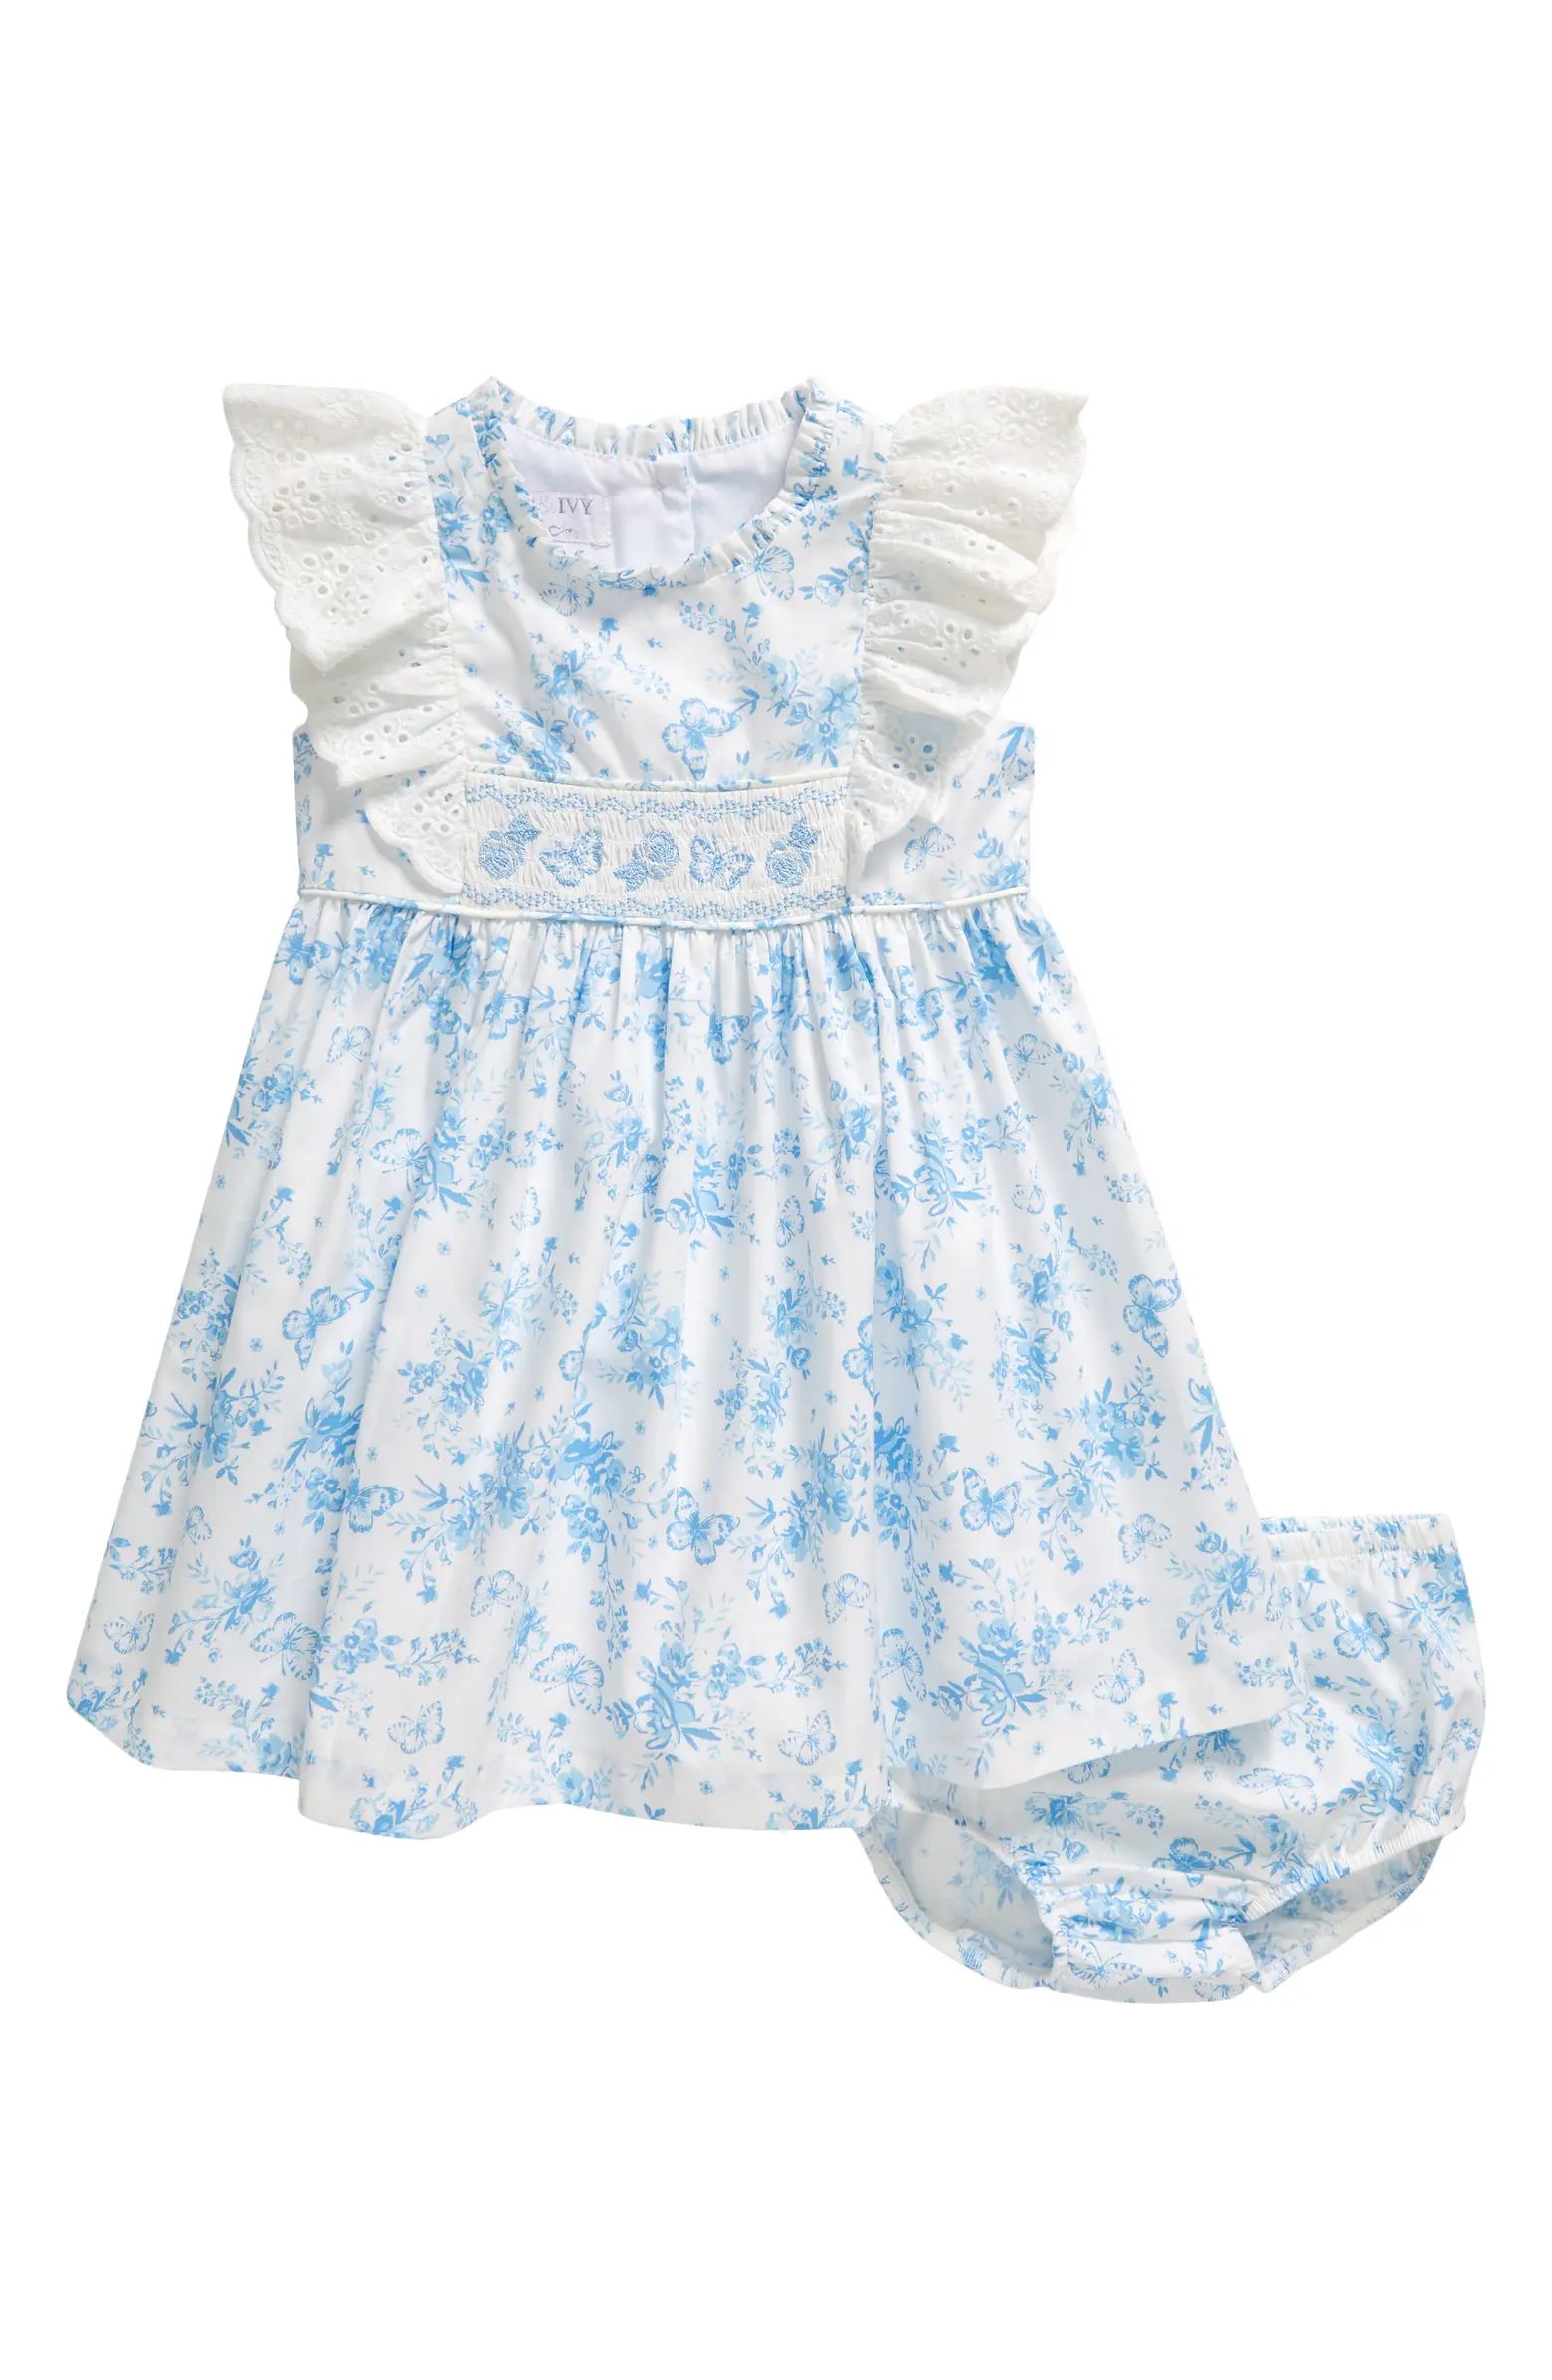 Iris & Ivy Butterfly Floral Smocked Ruffle Toile Dress & Bloomers Set | Nordstrom | Nordstrom